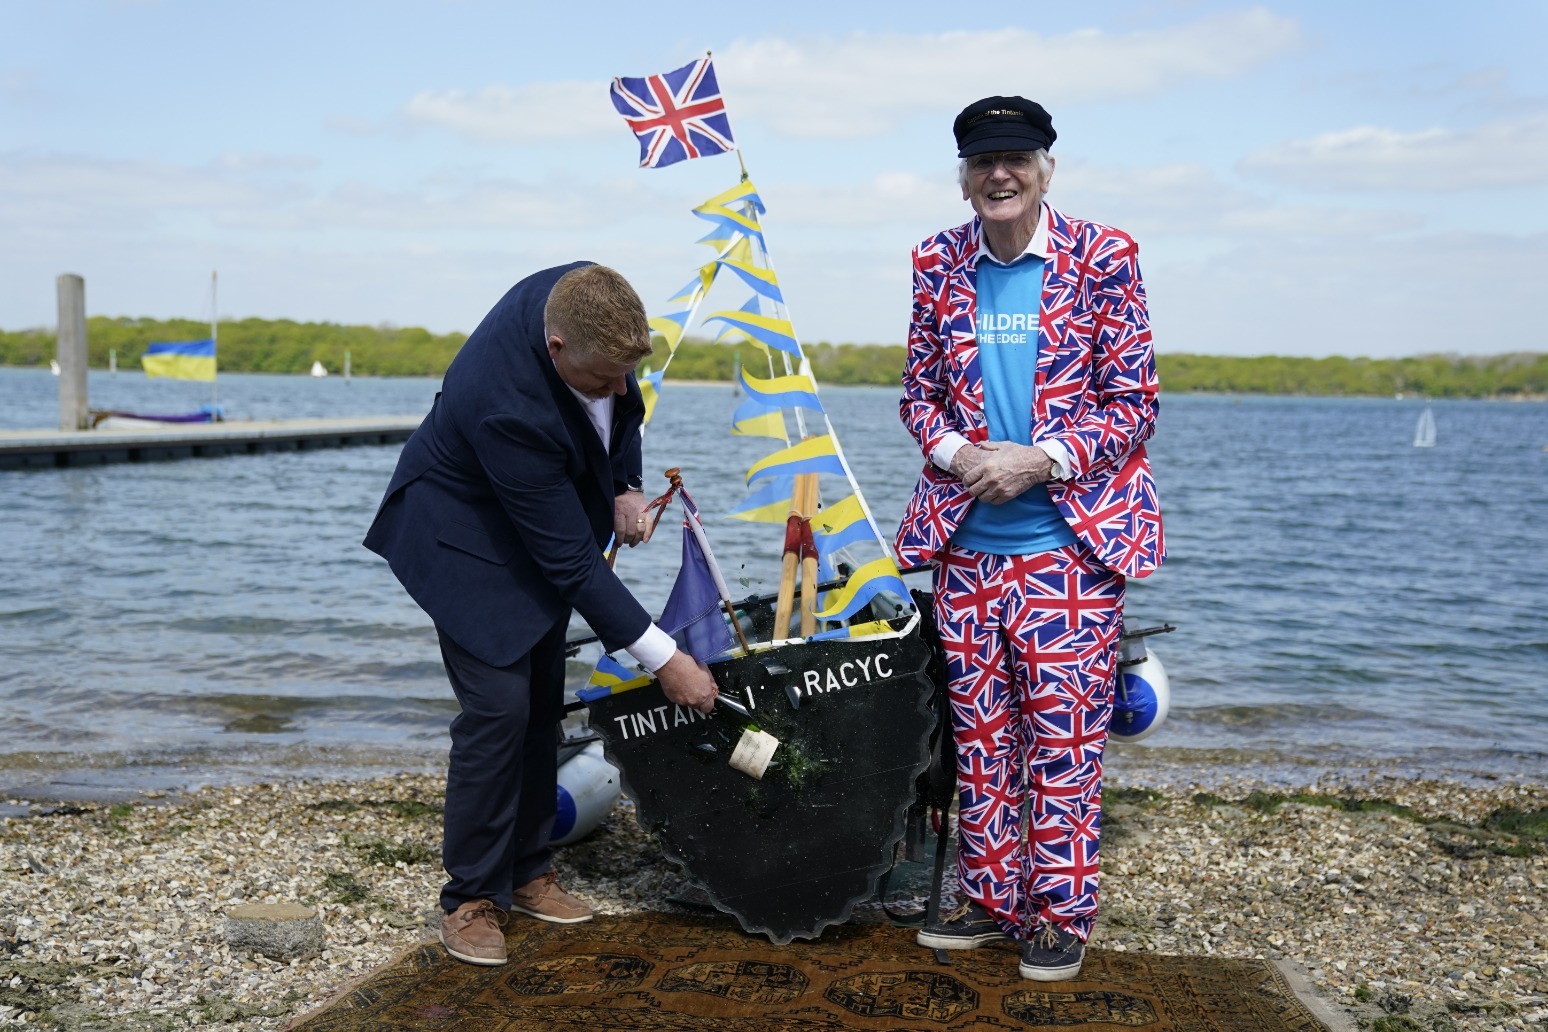 ‘Major Mick’ sets sail in Tintanic II to raise funds for Ukraine charity 